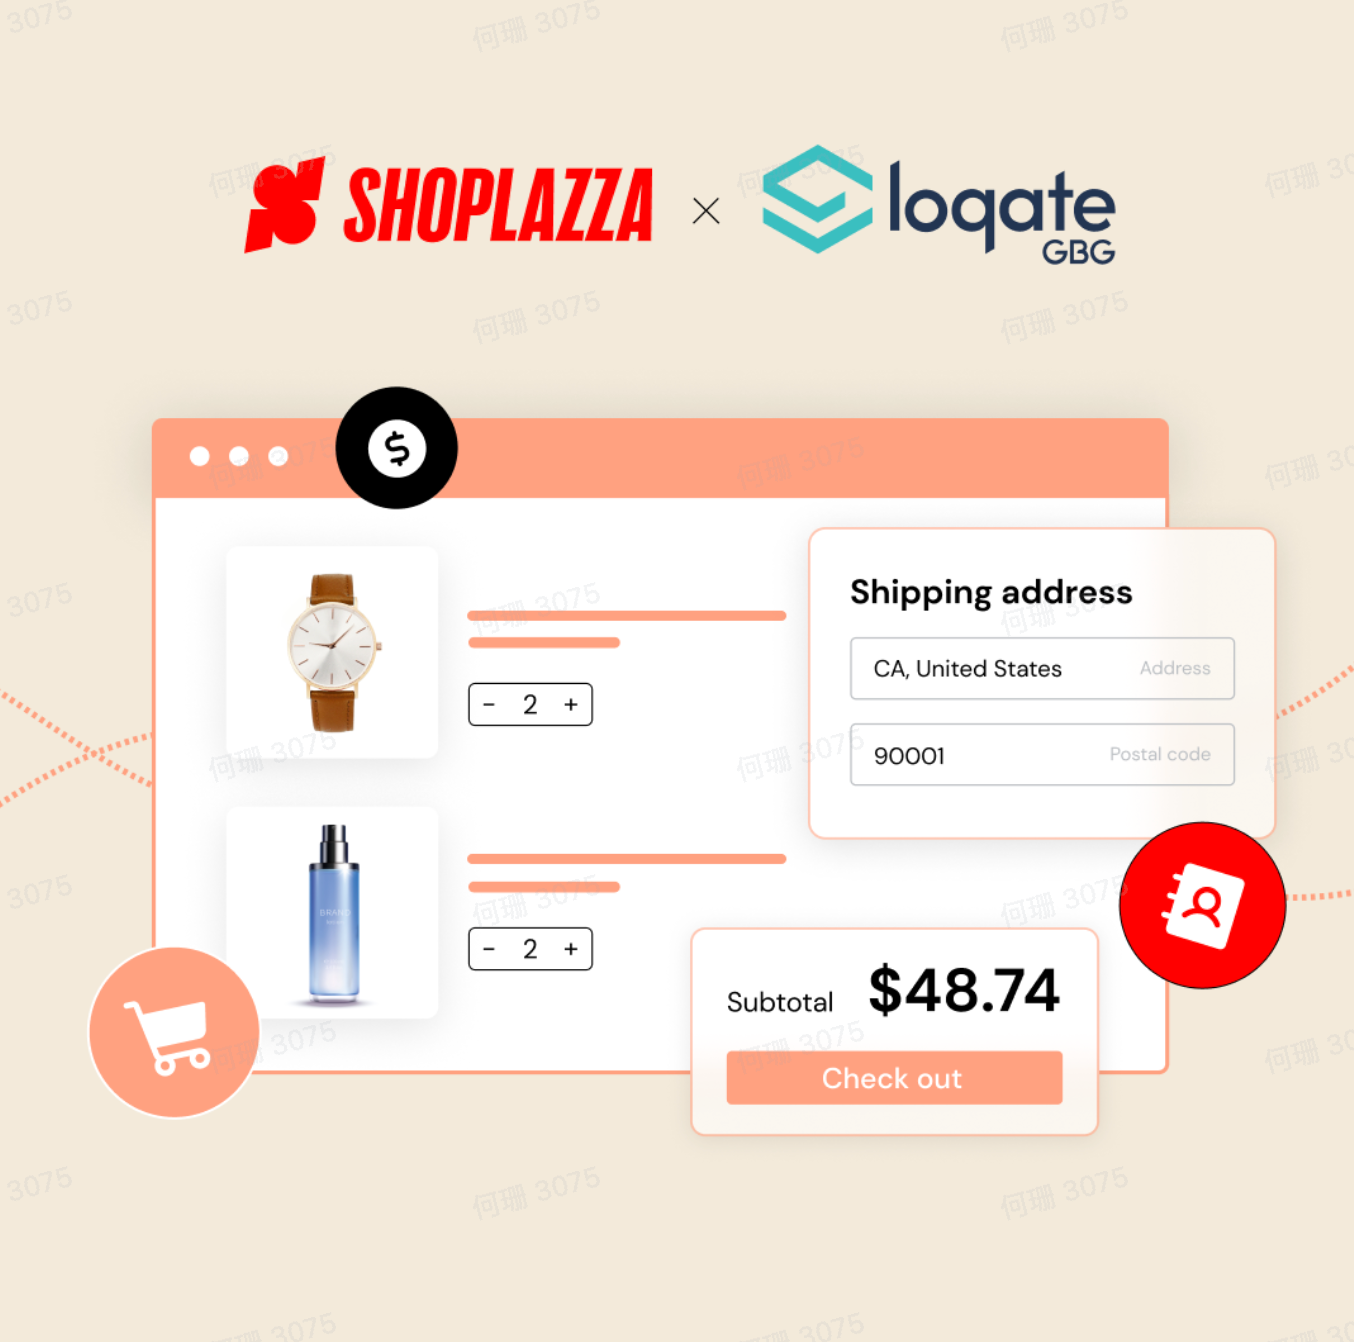 Our blog cover, with the logos of Shoplazza and Loqate.